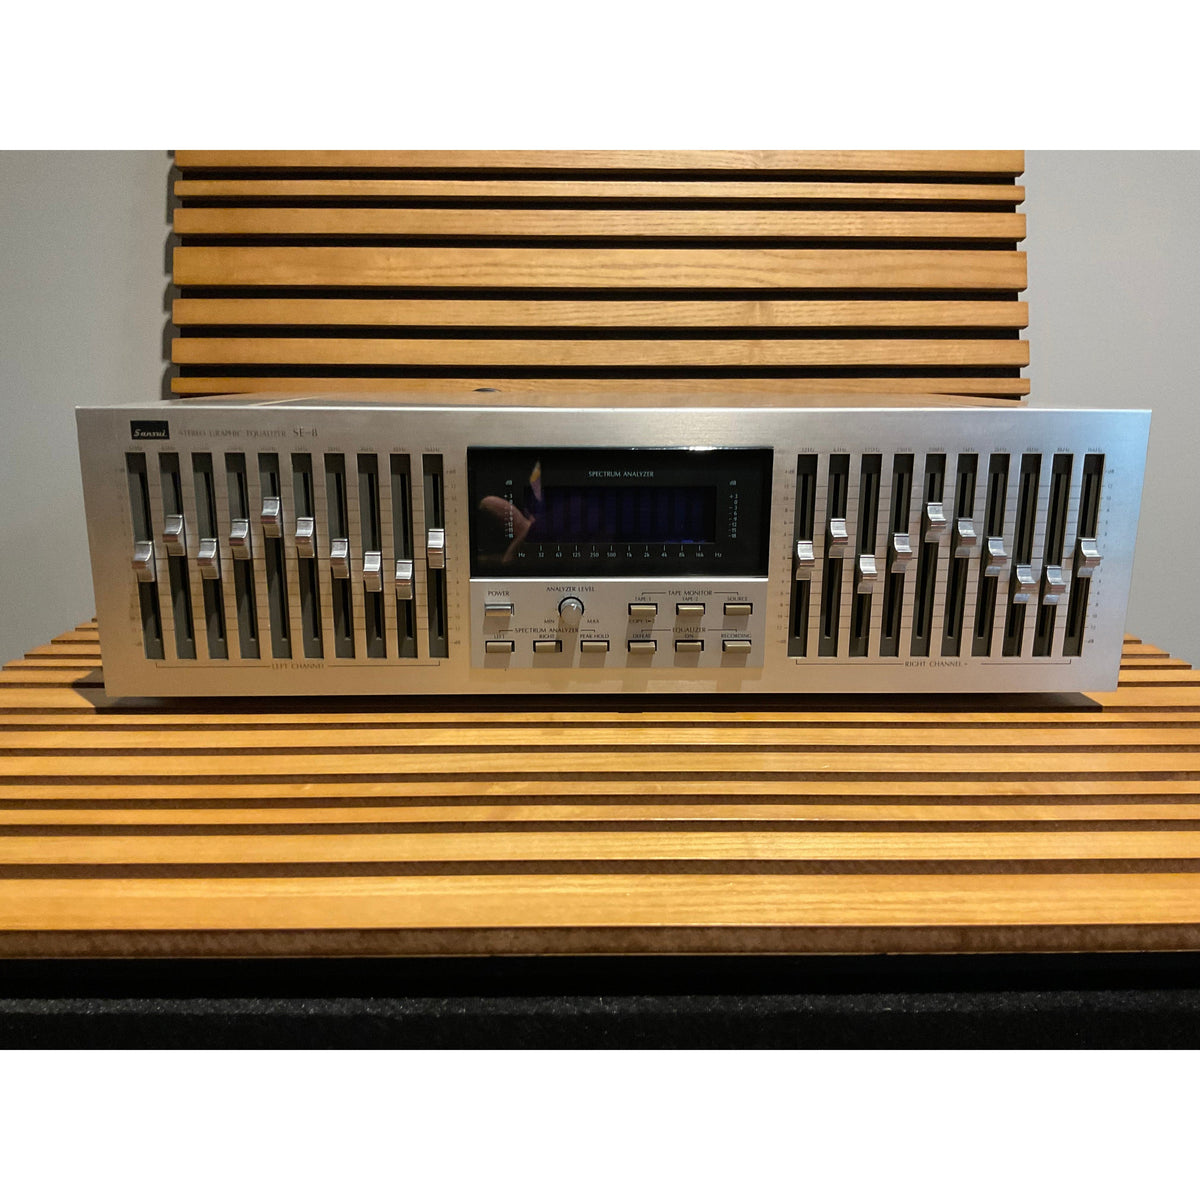 Sansui - SE-8 - Stereo Graphic Equalizer (Trade-In) 3 month